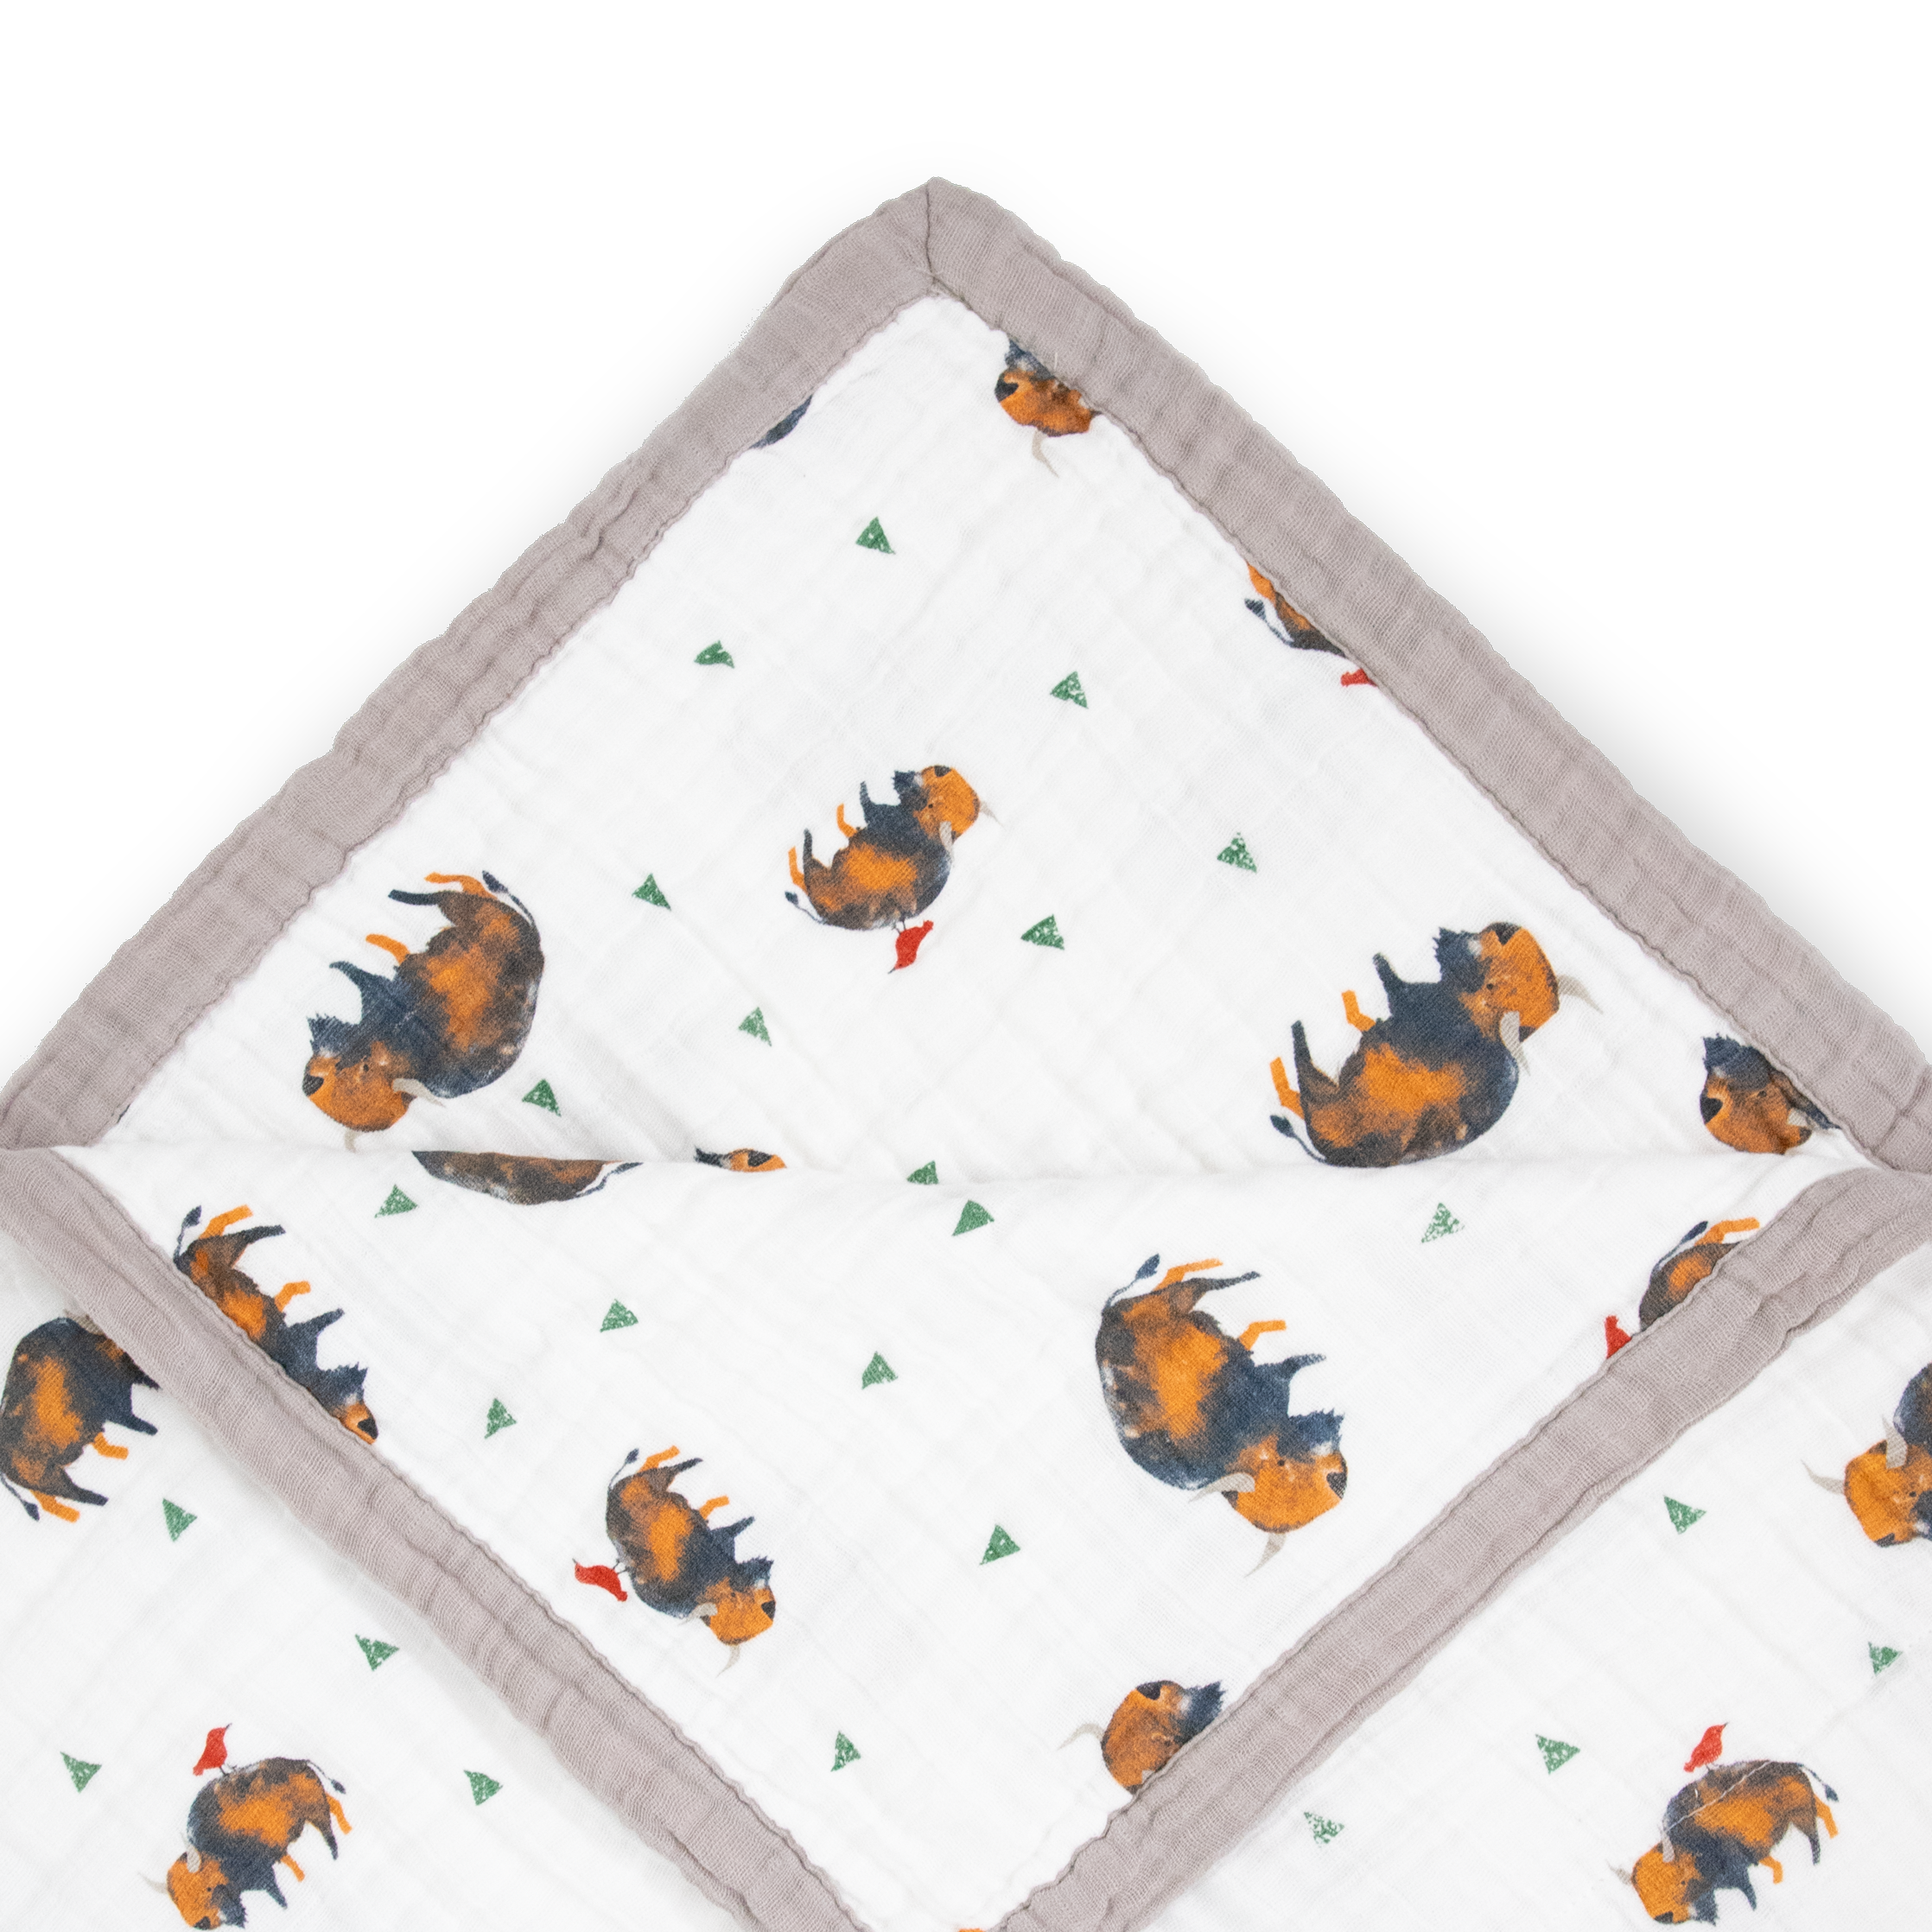 Cotton Muslin Quilted Throw - Bison